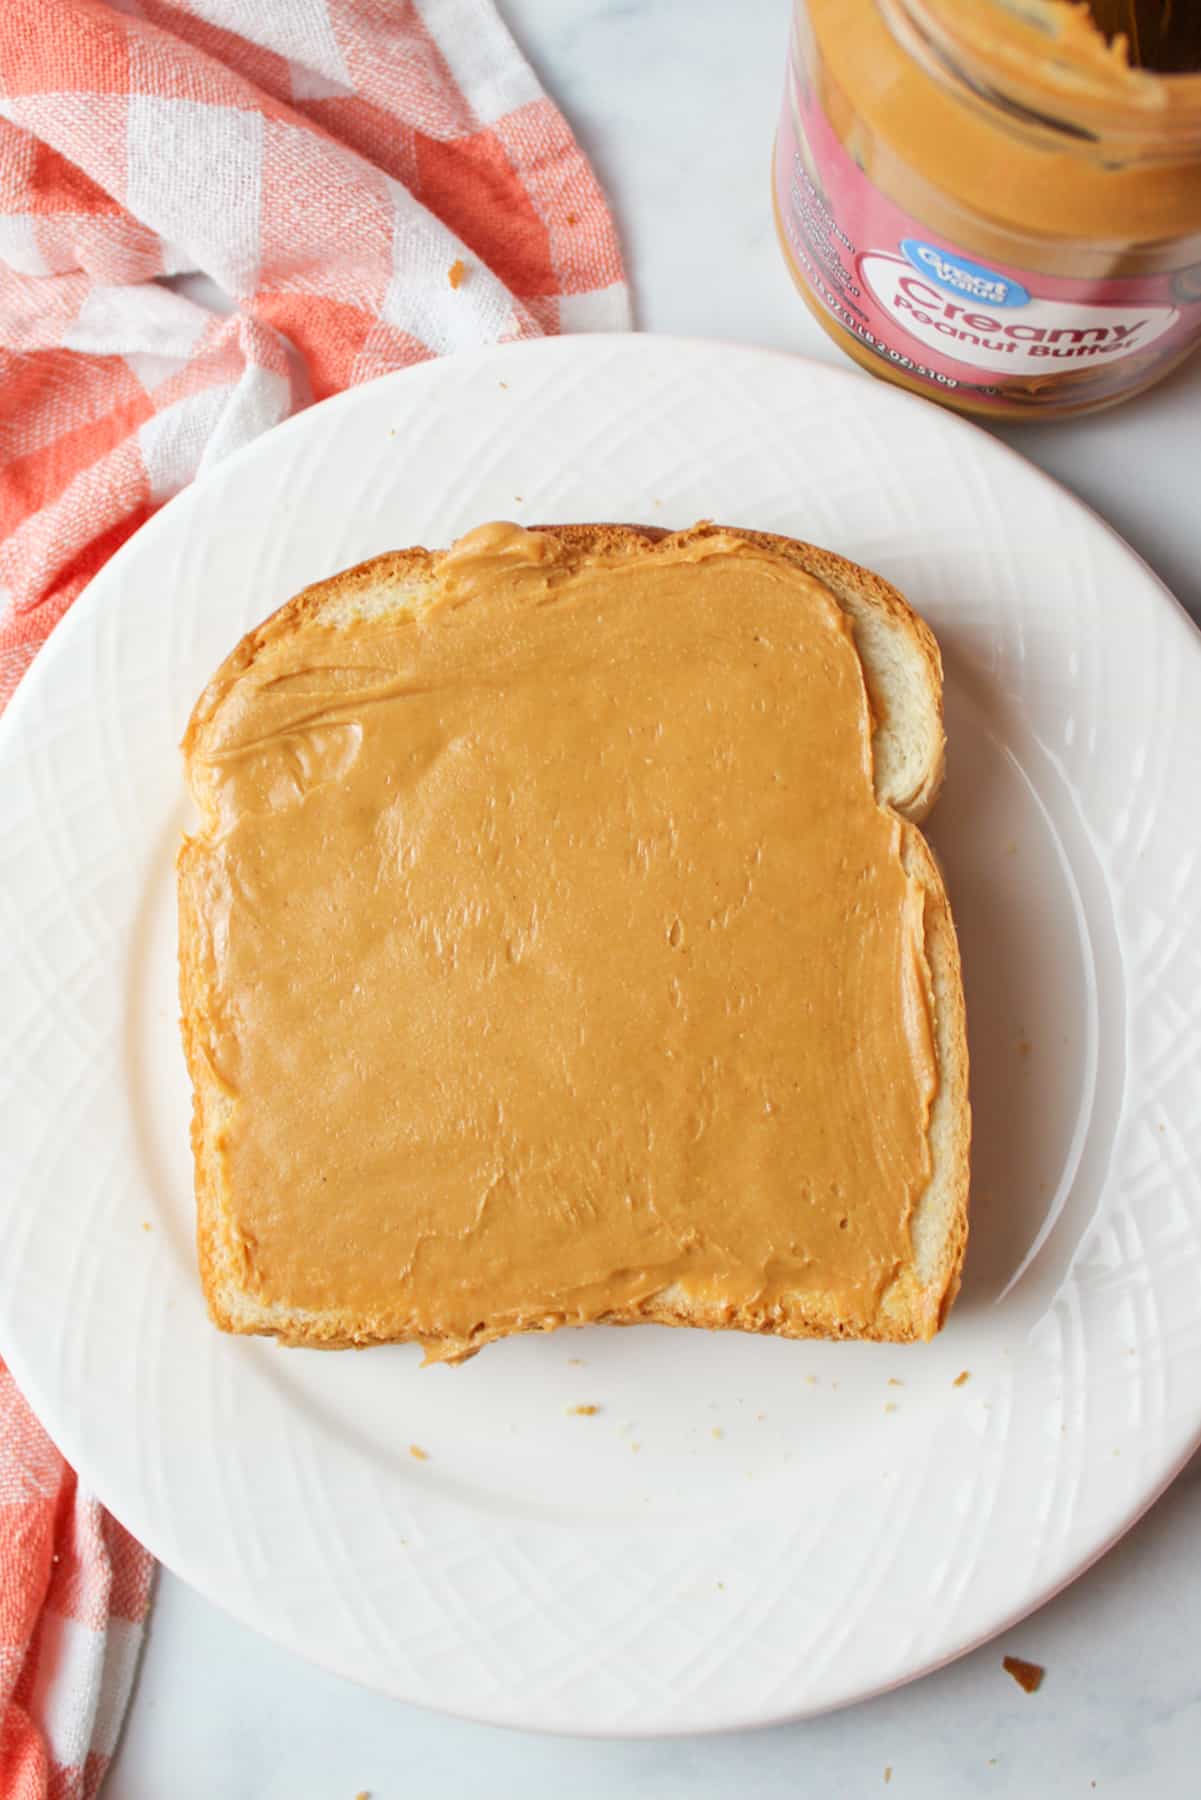 peanut butter spread onto a slice of bread on a white plate